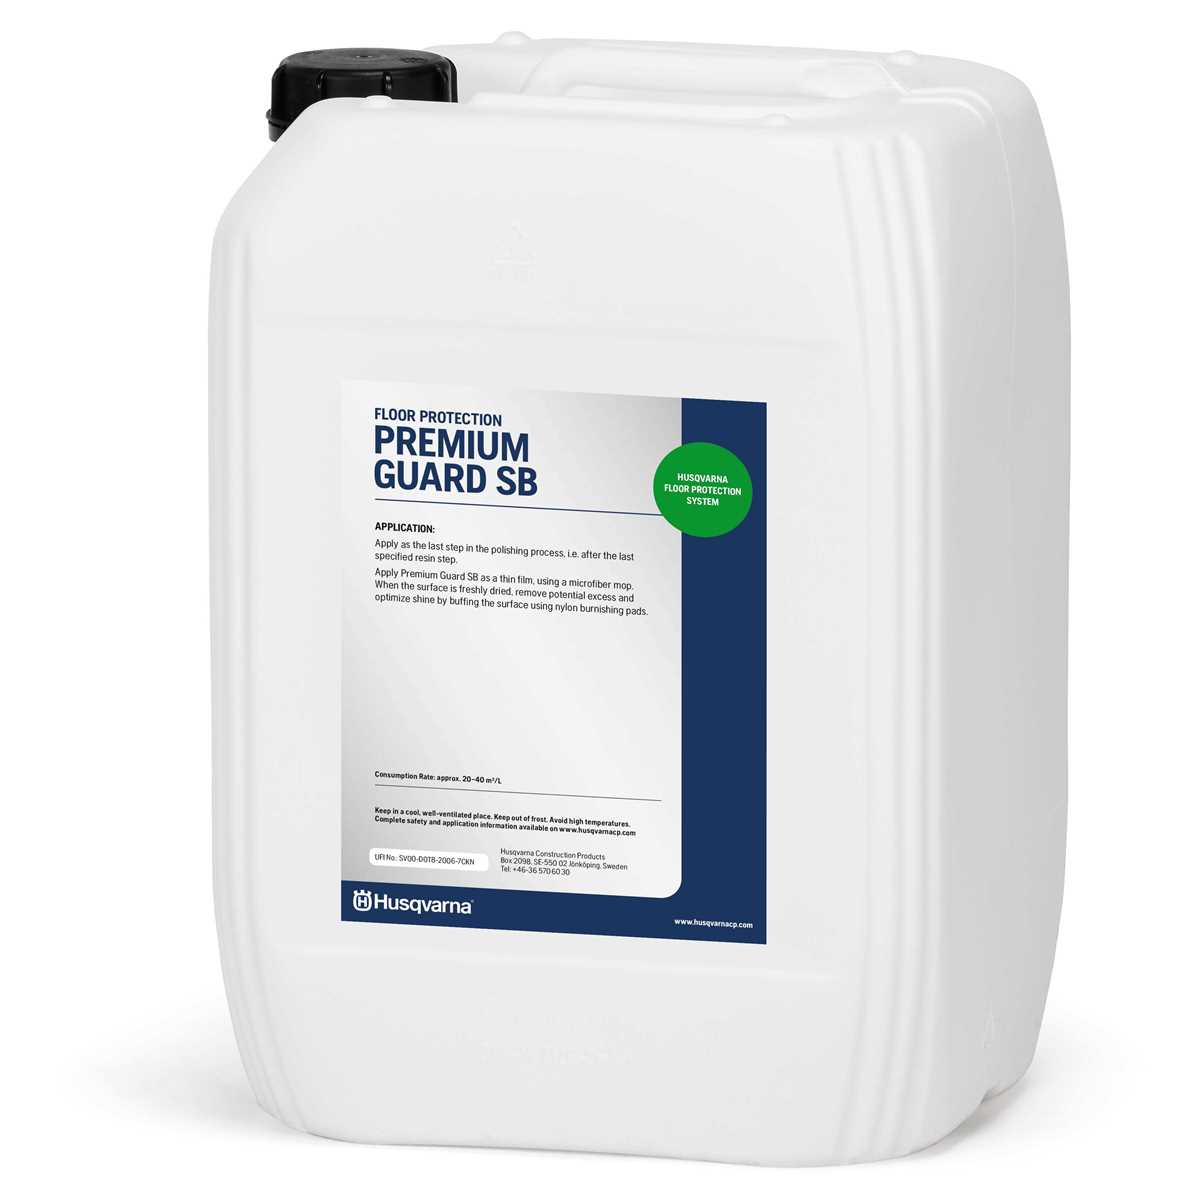 PREMIUM GUARD SB is a solvent-based fully penetrating guard that is very easy to apply and provides premium protection. Available from Speedcrete, United Kingdom.